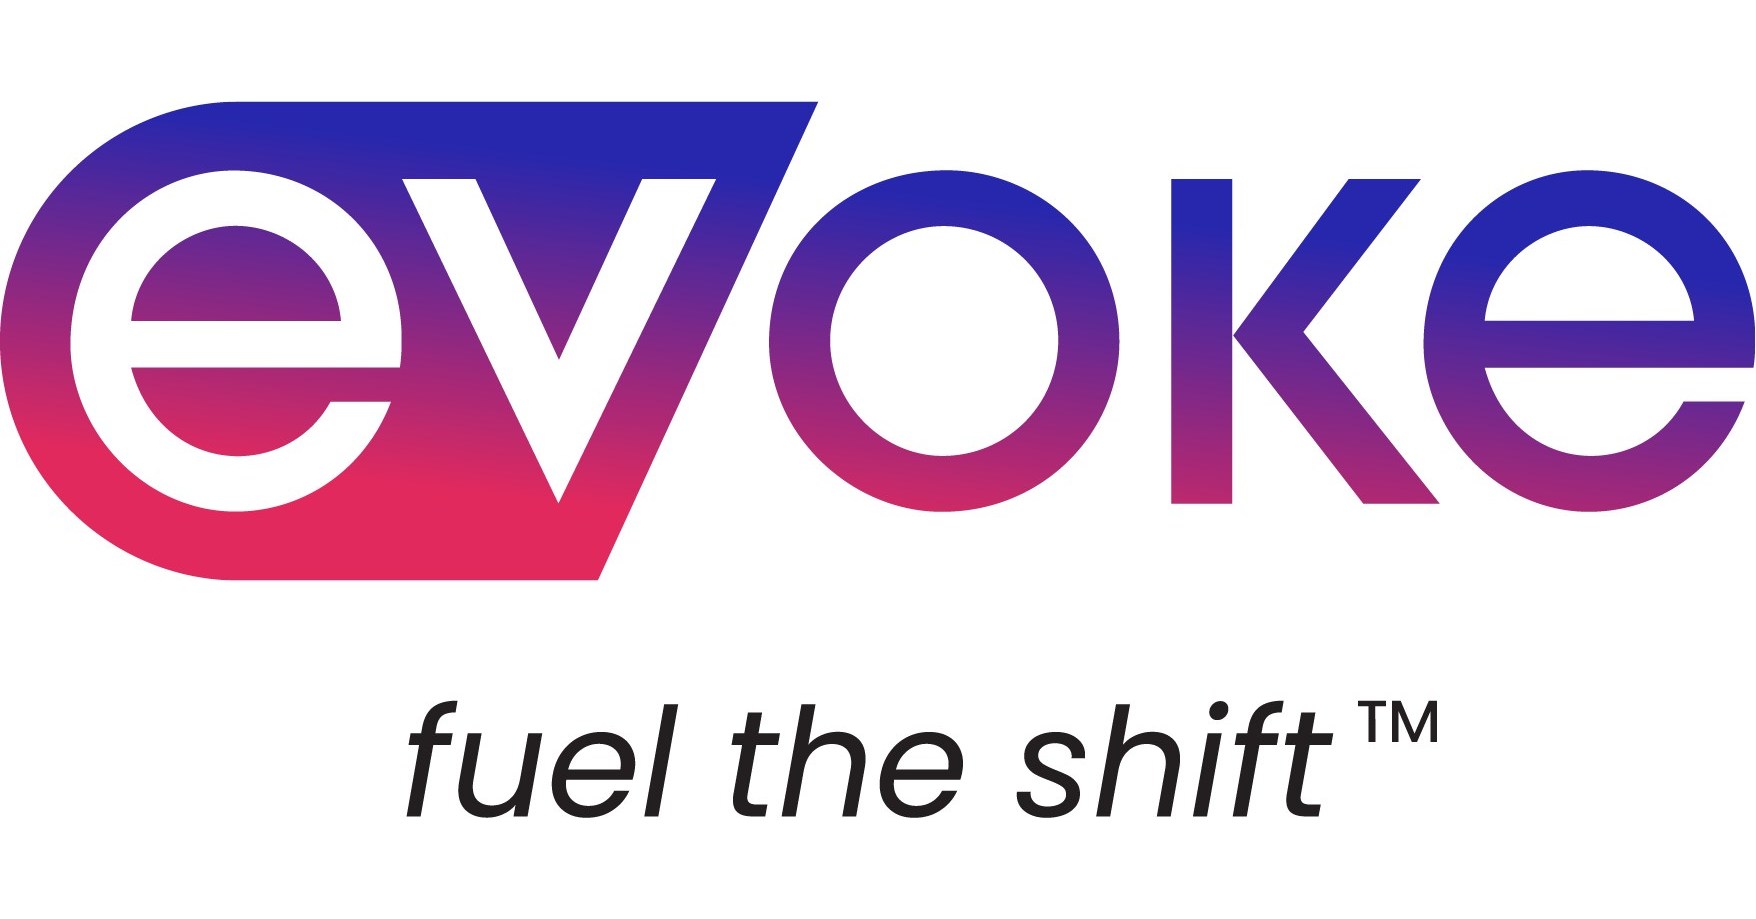 EVoke Systems Announces Development of Open APIs for Managed Electric Vehicle Charging